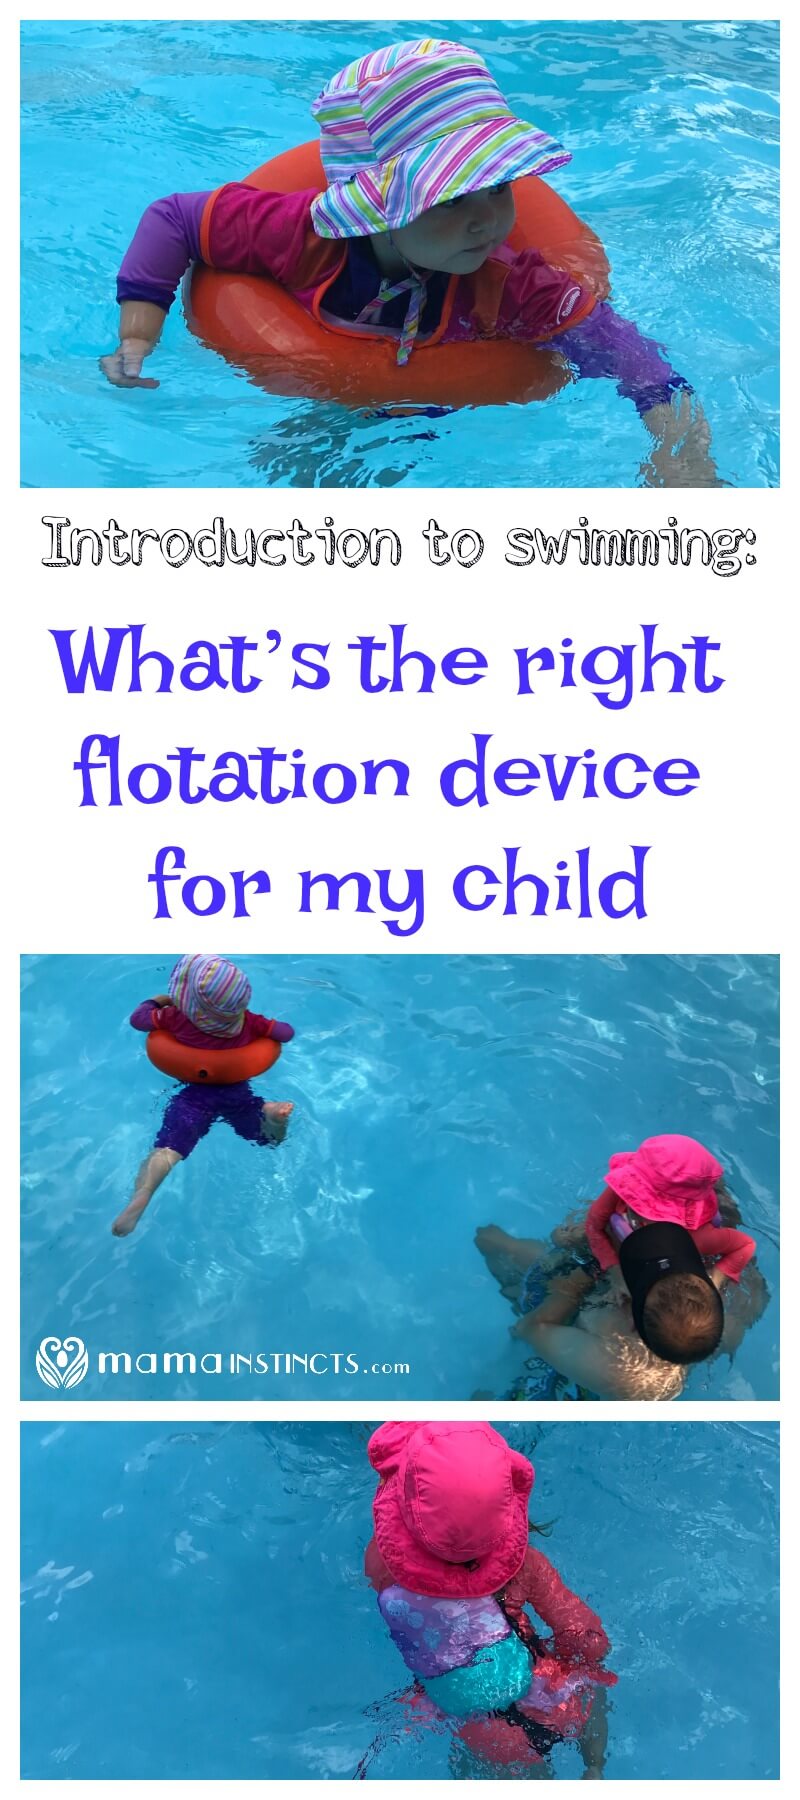 Does your child love to play in the pool but doesn't know how to swim yet? Find out which is the best type of flotation device for your child depending on weight and their swimming skills. A summer must-have!